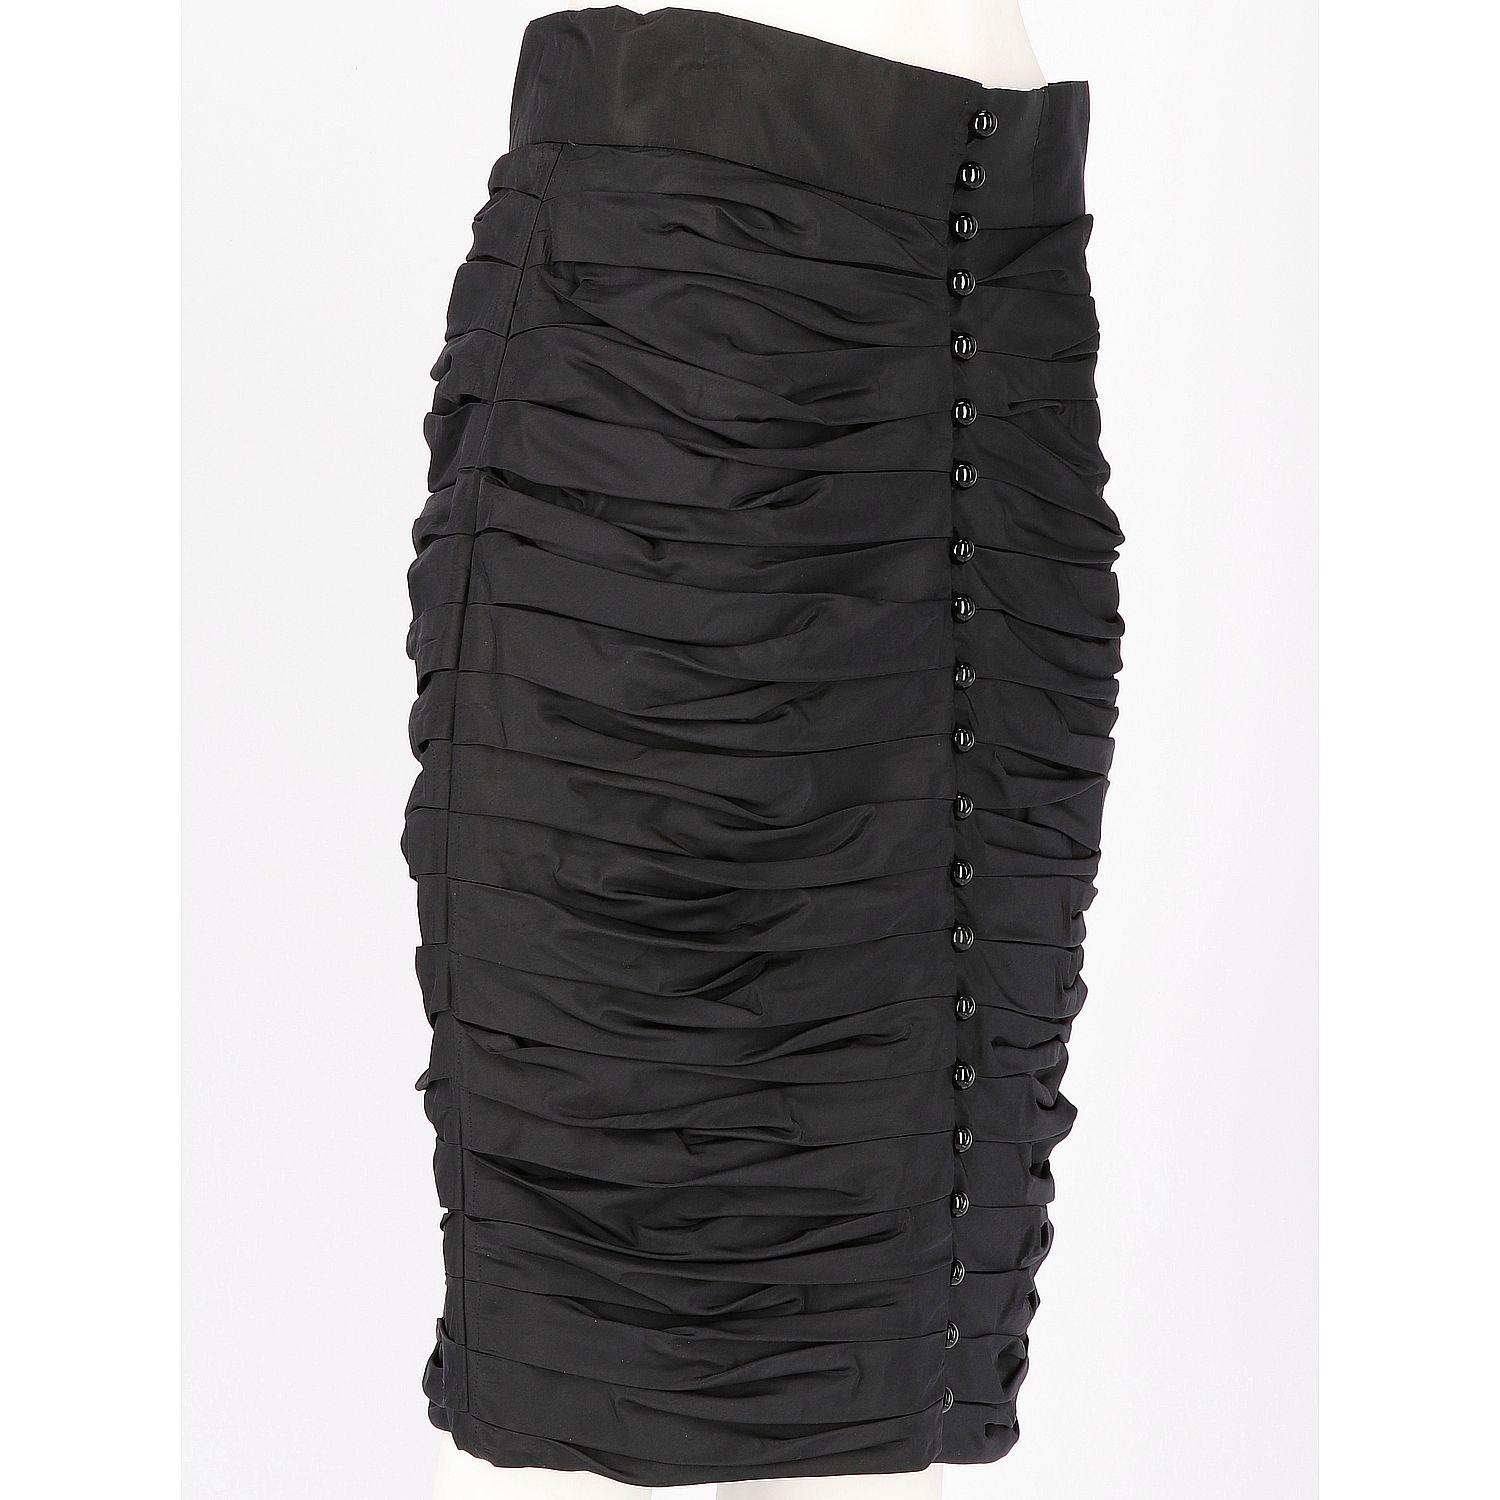 Refined Lanvin black viscose ruched pencil skirt. It features a full-length front button fastening and soft gathered fabric. The item is vintage, it was produced in the 80s and is in very good conditions, it has been subjected to a modification